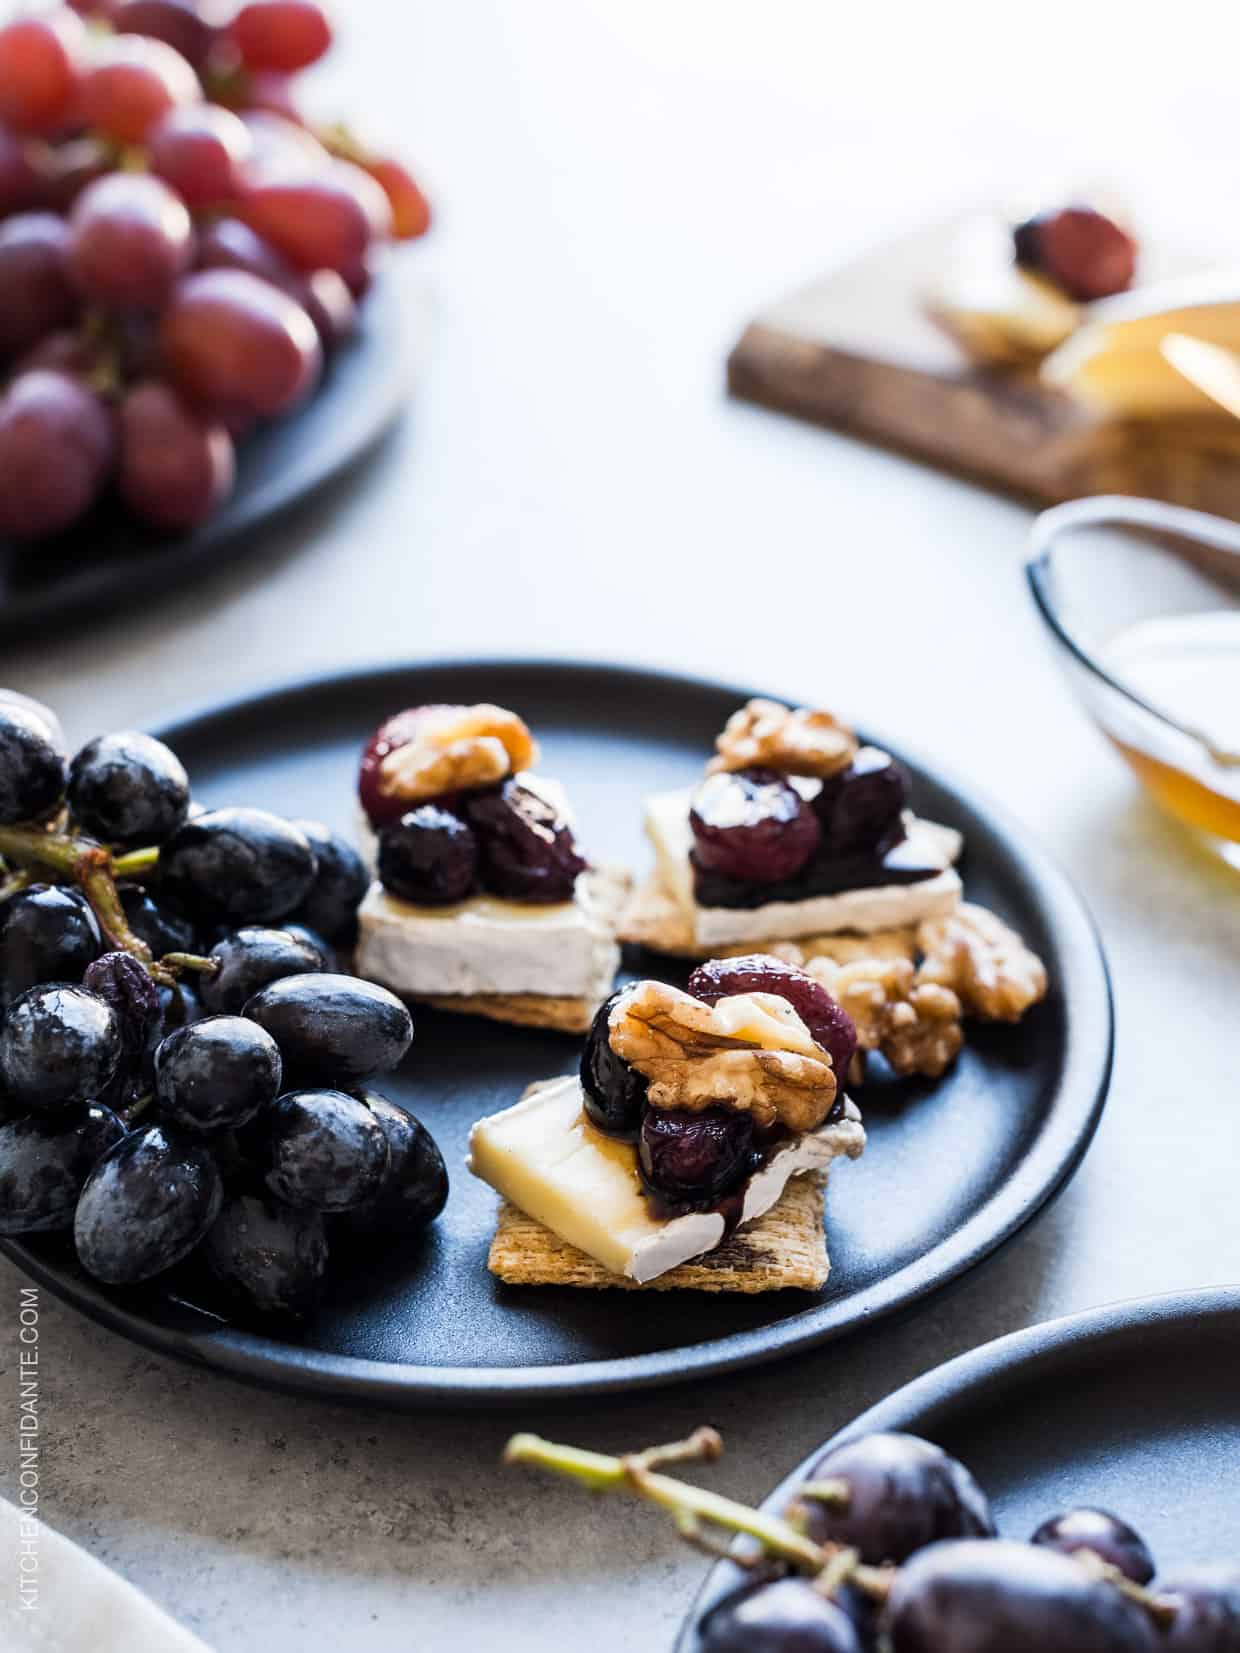 Close up view of Caramelized Grape, Brie and Walnut Bites made with TRISCUIT crackers and served on a plate.